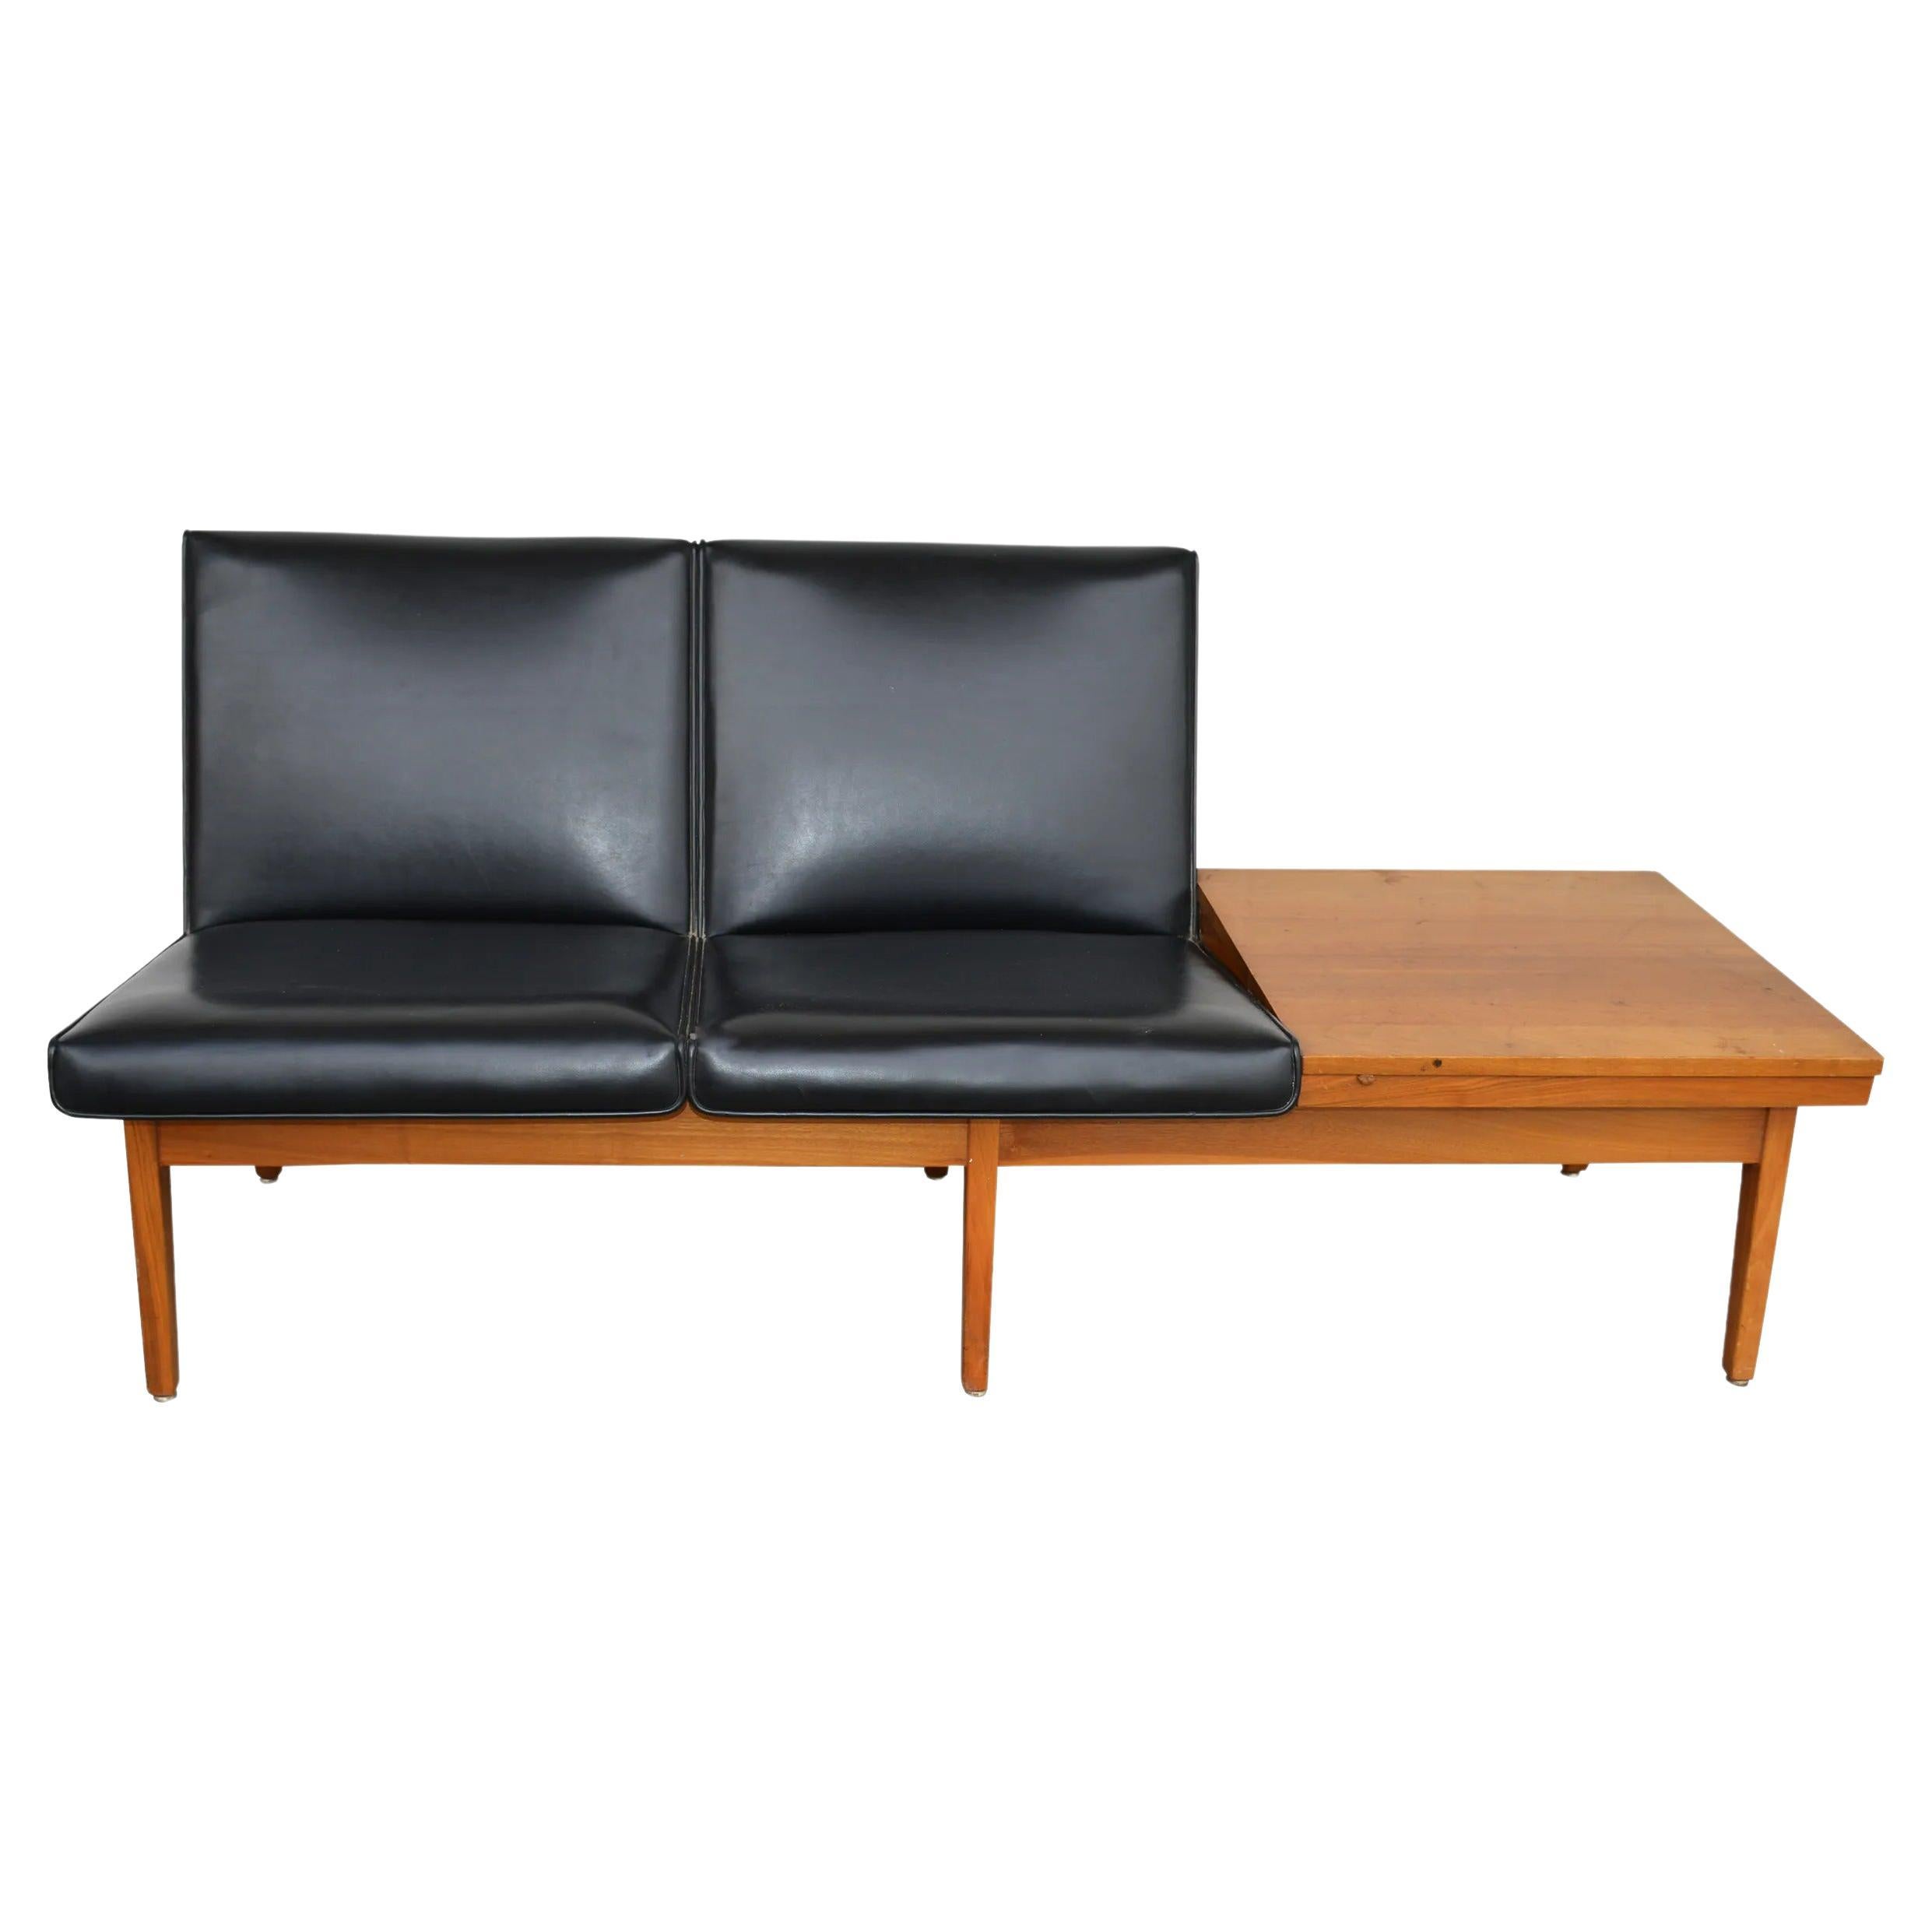 Mid Century Gunlocke for Remington Rand 2 Seater Bench

 
The Remington Rand Library Bureau Division provided furniture, equipment, and supplies to America’s libraries from the late 1920s through the 1950s as did Gunlocke. 


Rare Mid-Century